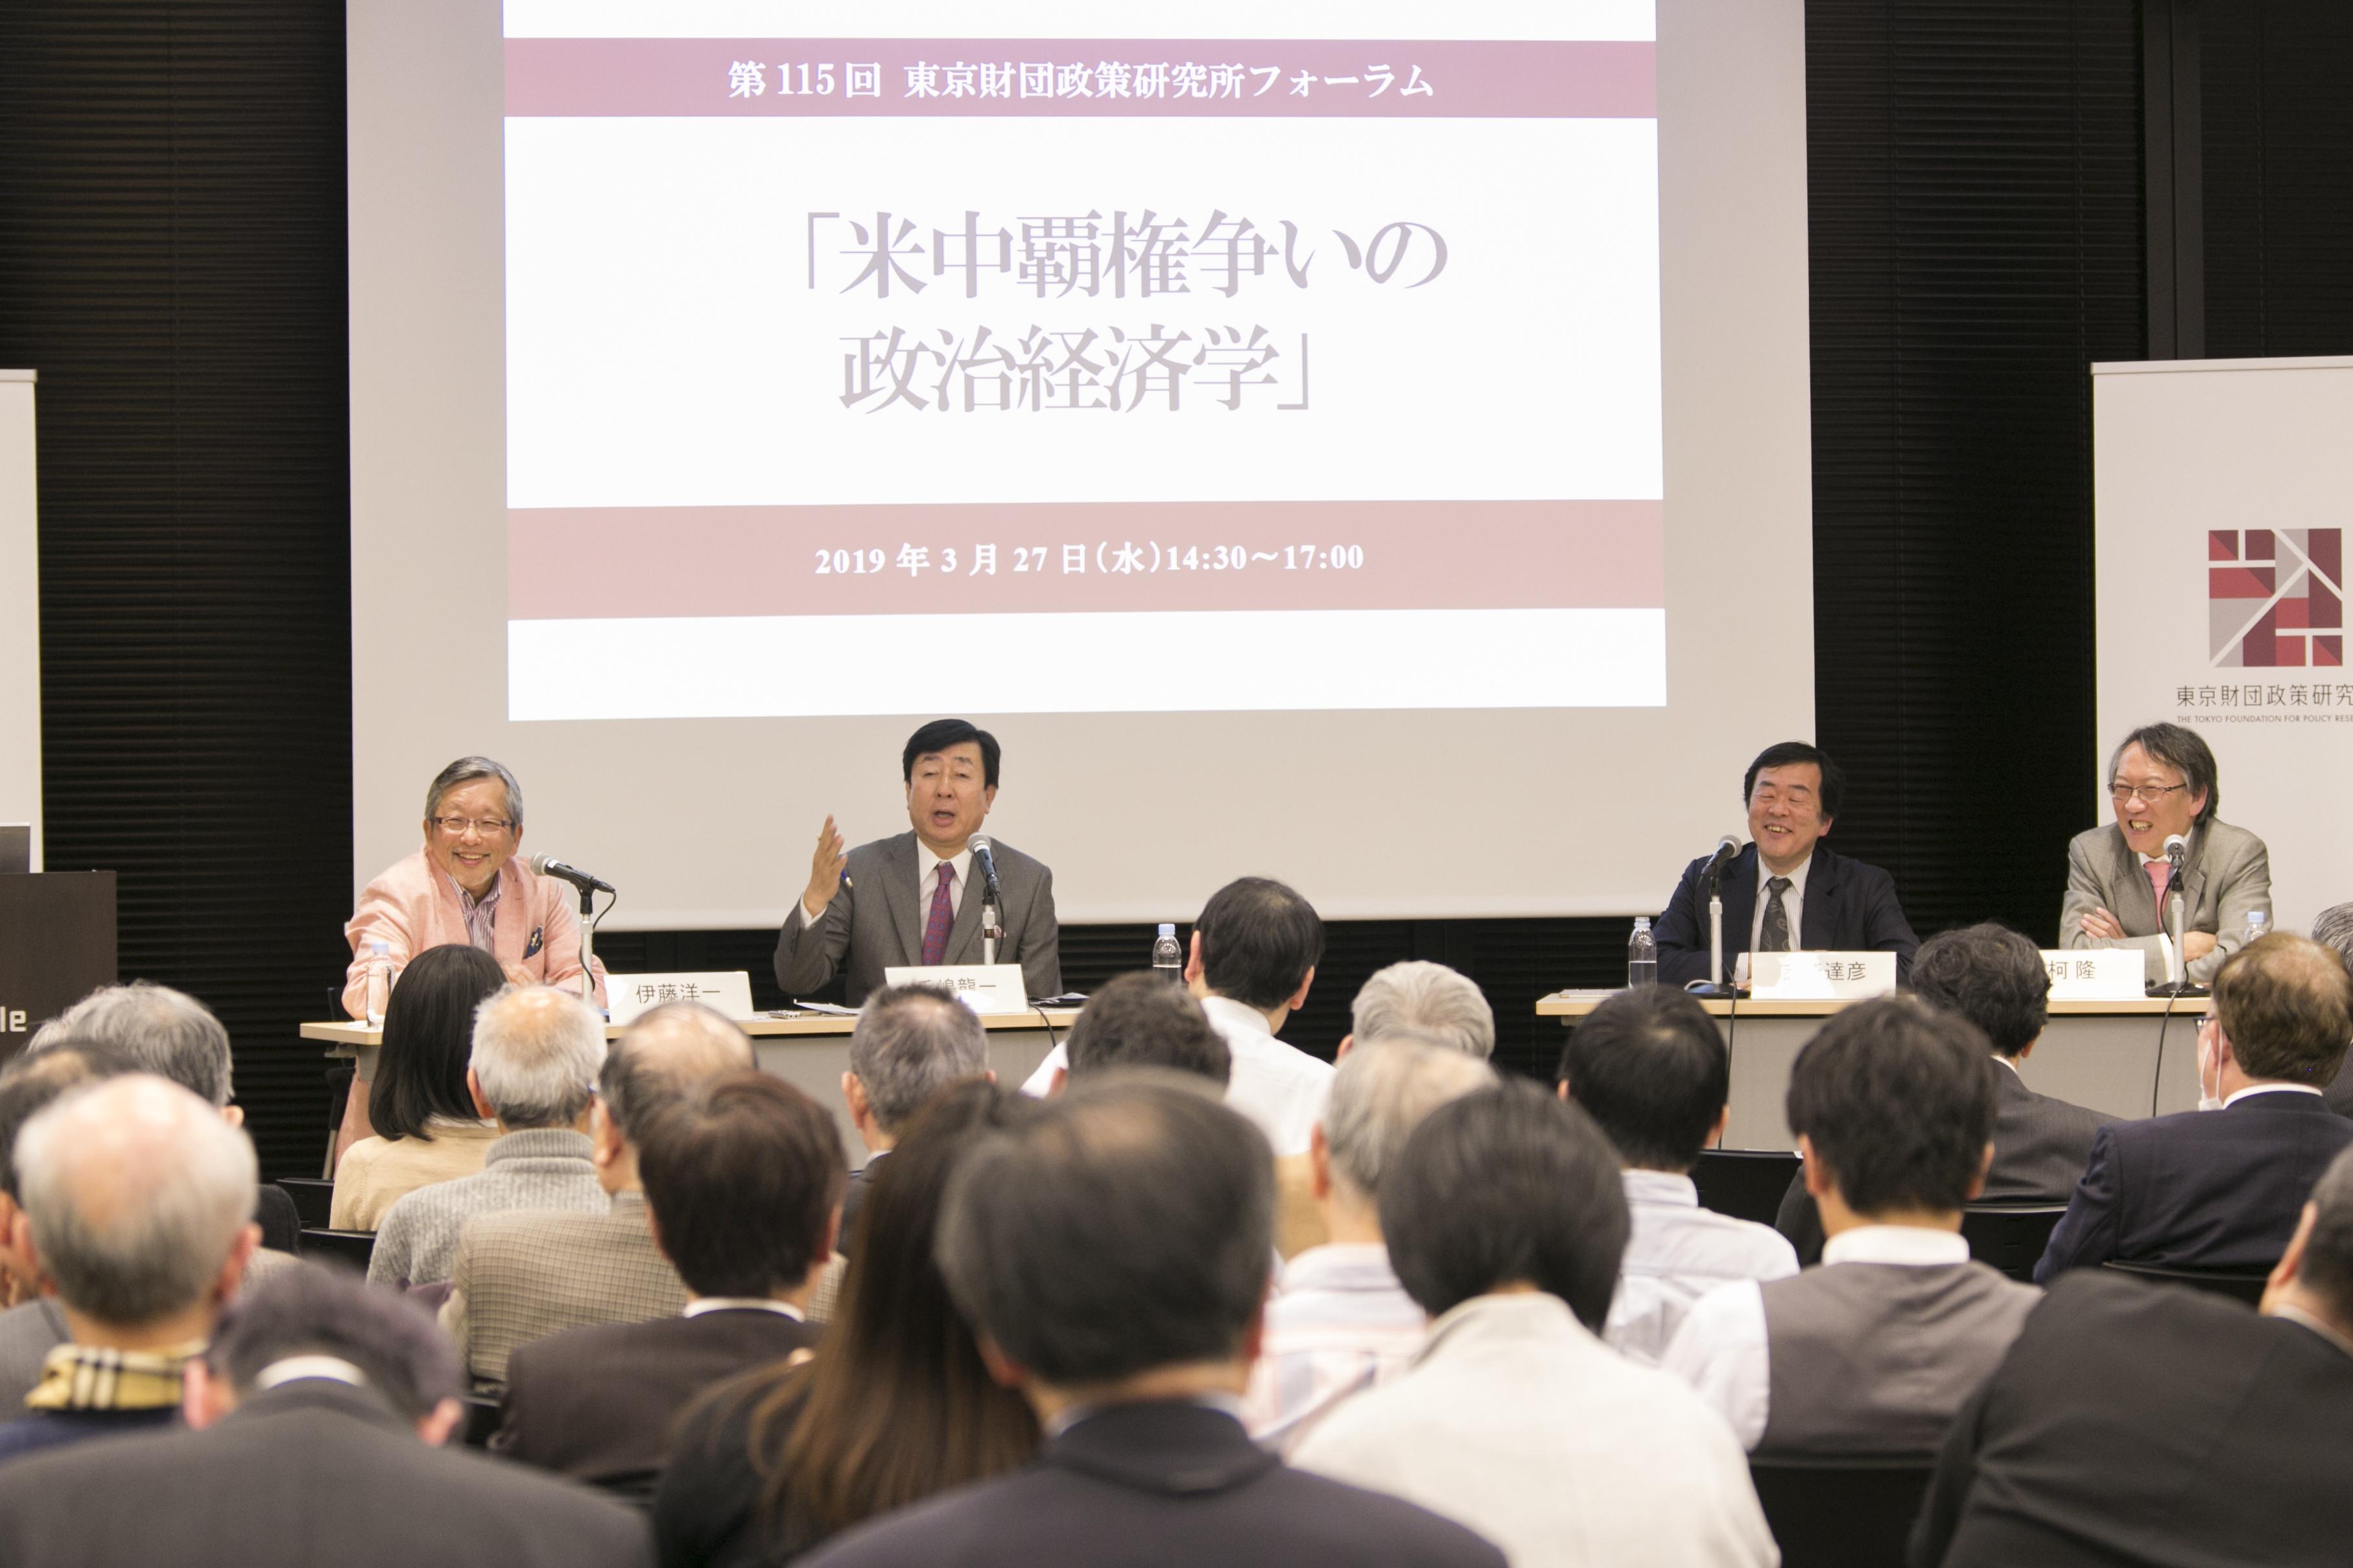 Experts Examine Escalating US-China Rivalry at 115th Tokyo Foundation for Policy Research Forum